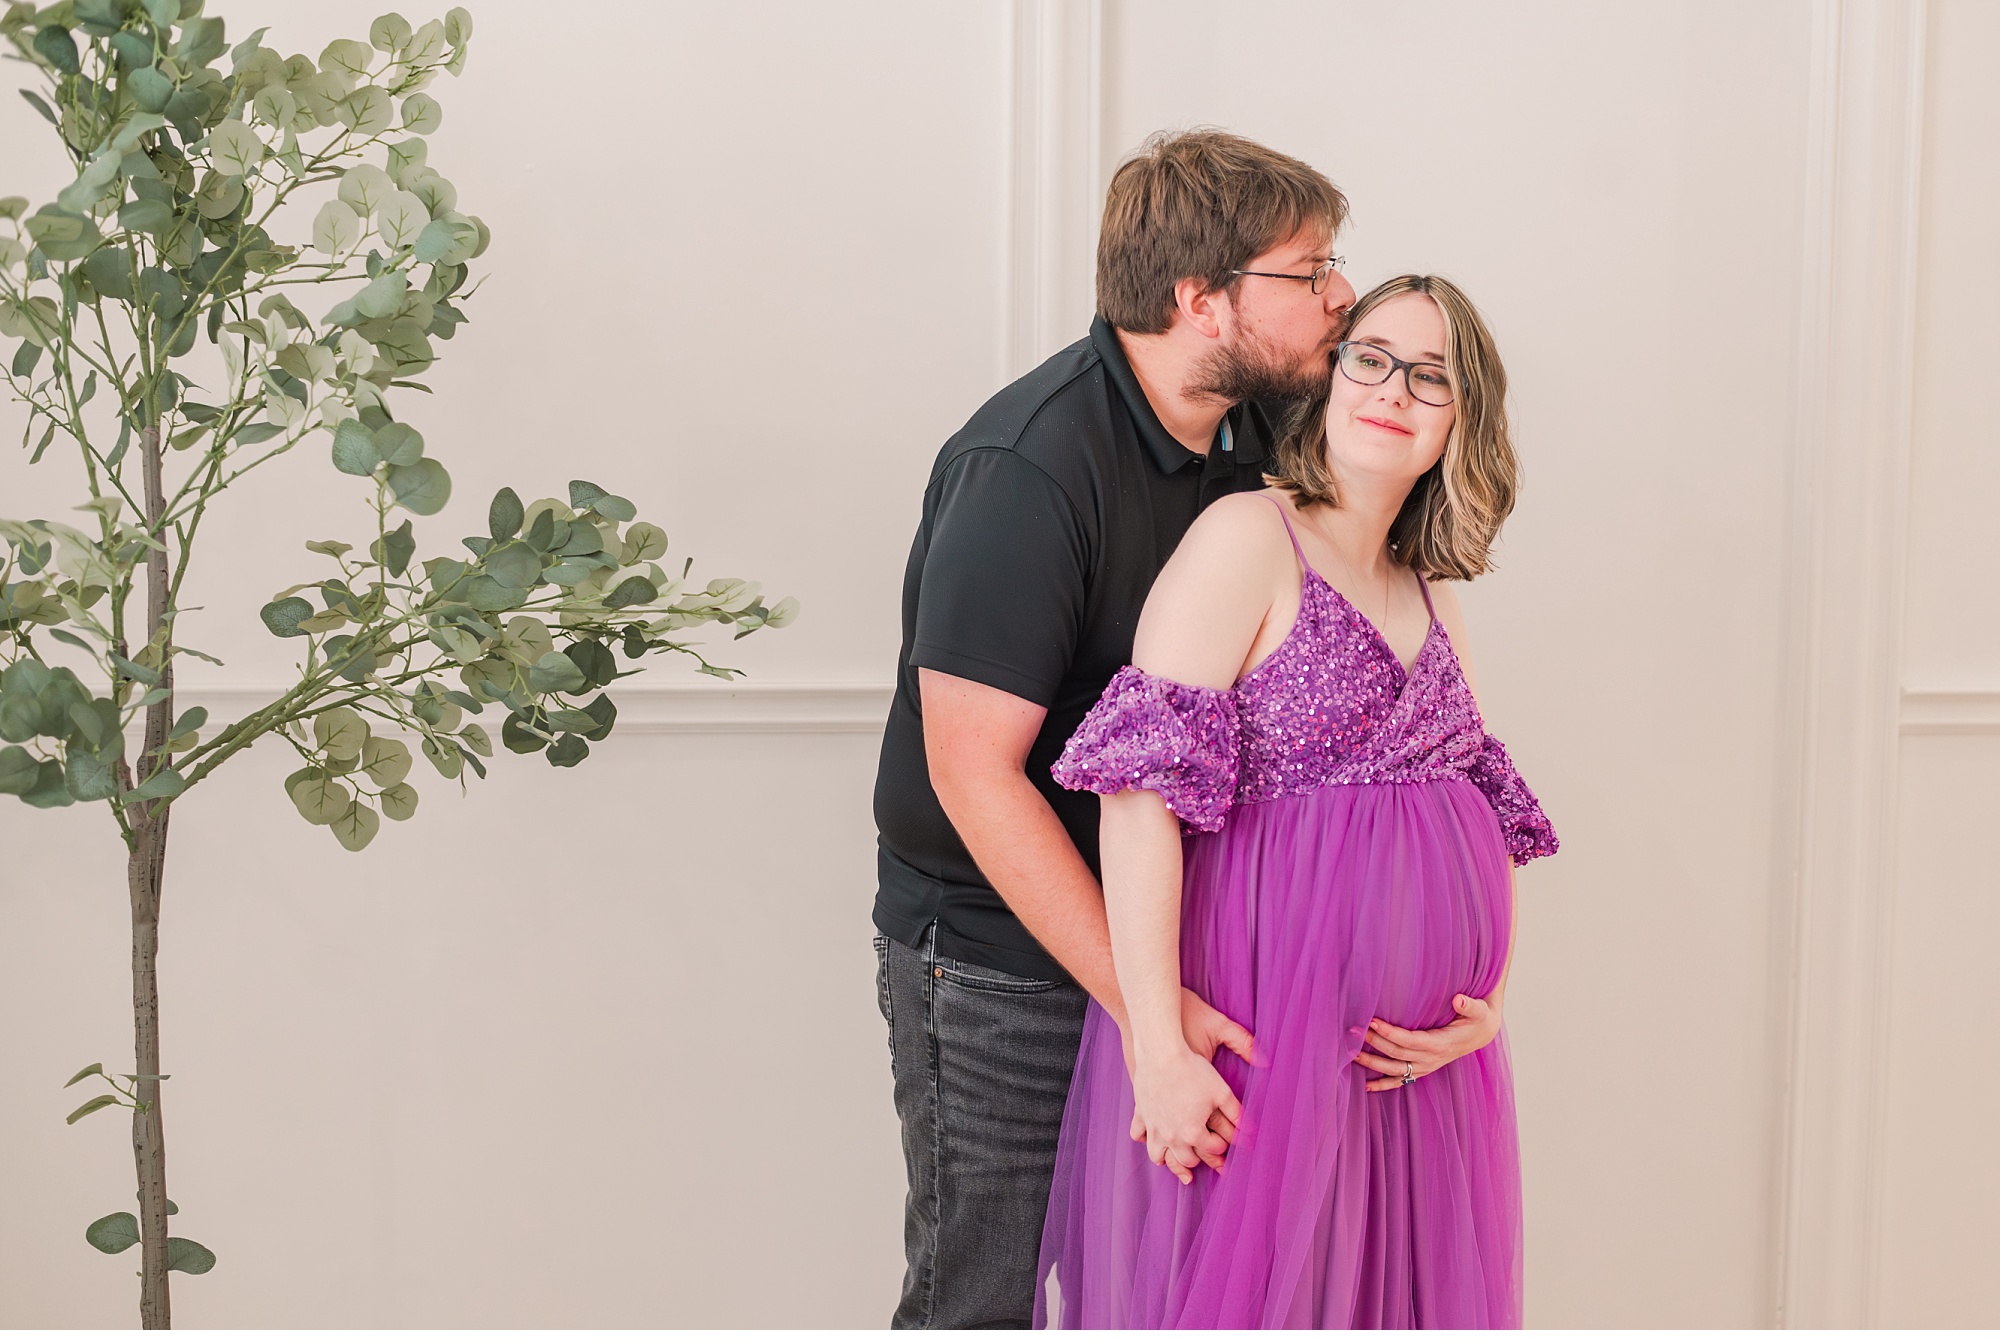 eric kisses victoria during their maternity session at soho haus by maternity photographer in toronto life is beautiful photography